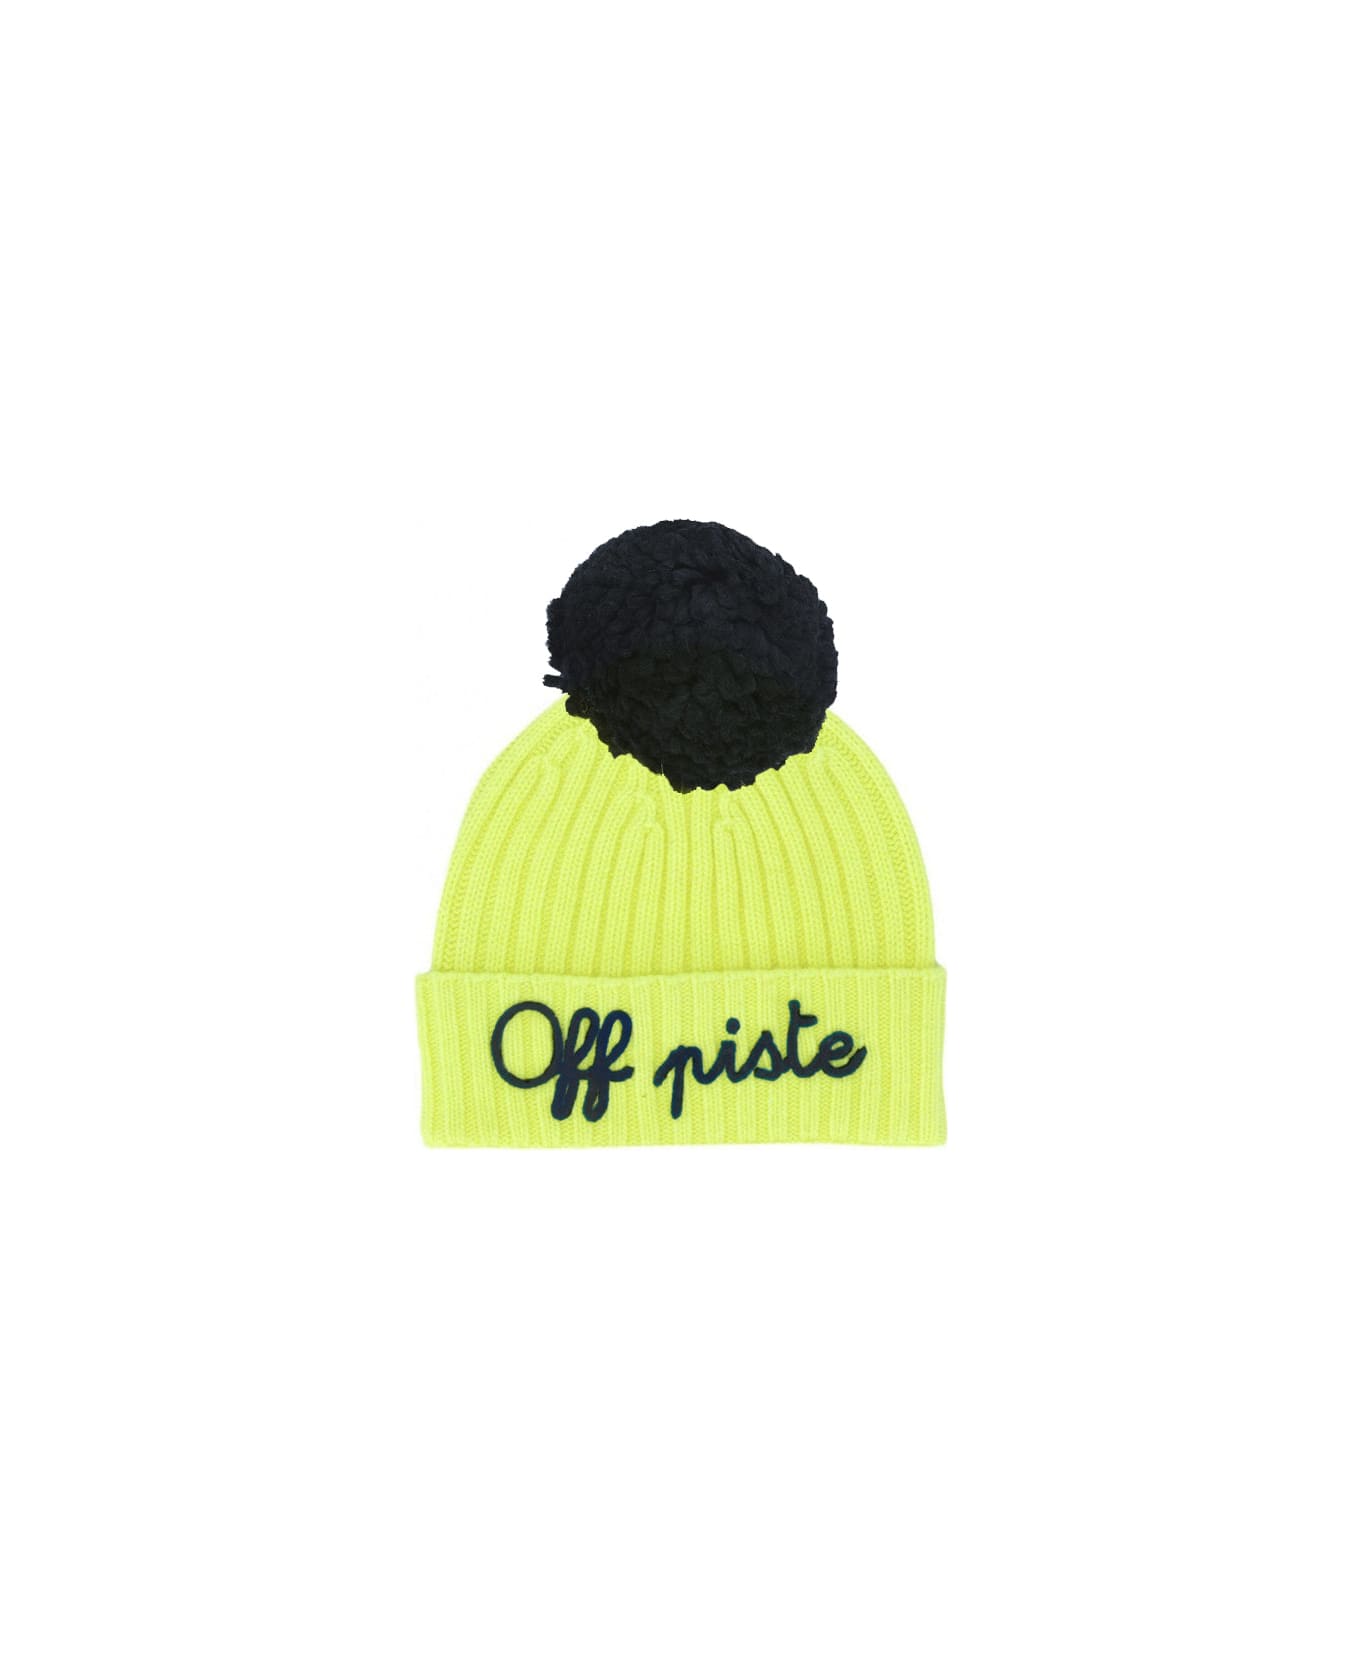 MC2 Saint Barth Kid Cashmere Blended Yellow Fluo Hat Off Piste Embroidery - YELLOW